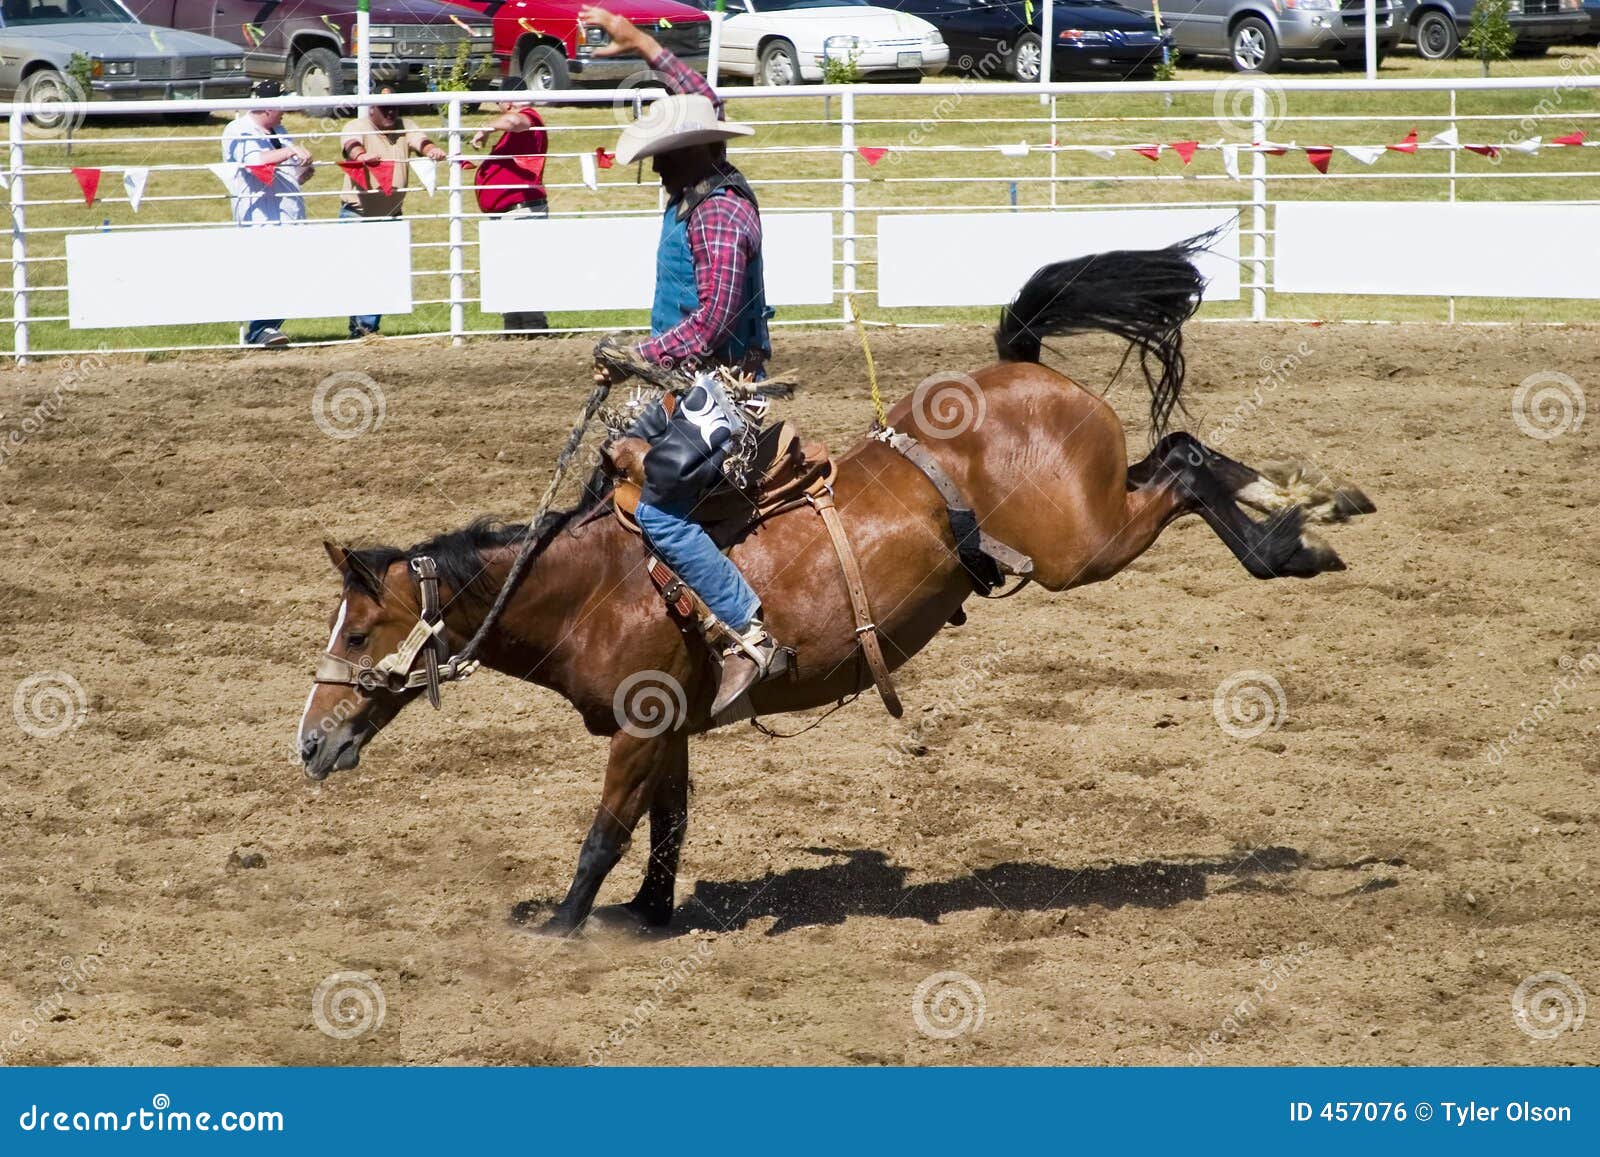 saddle bronc riding coloring pages - photo #43